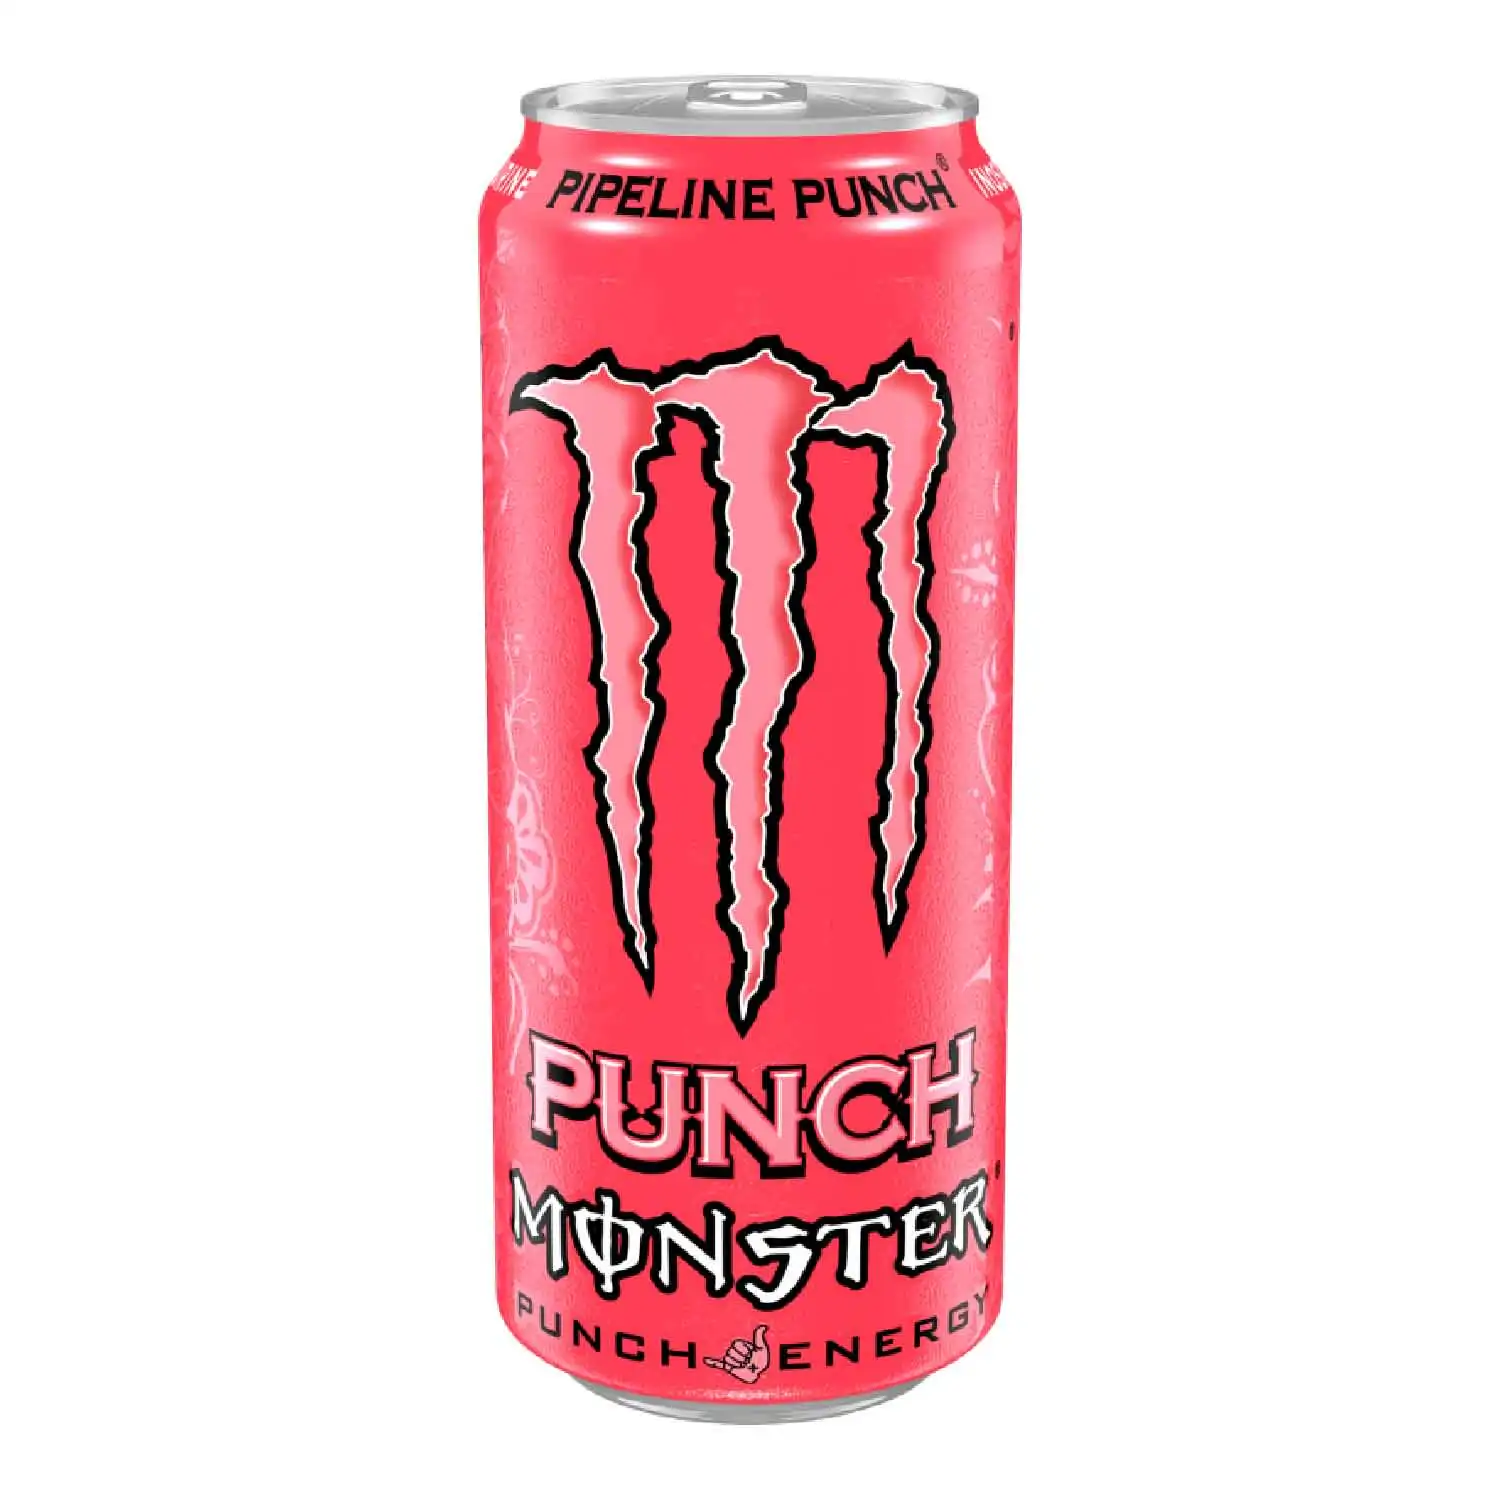 Monster pipeline punch 50cl - Buy at Real Tobacco